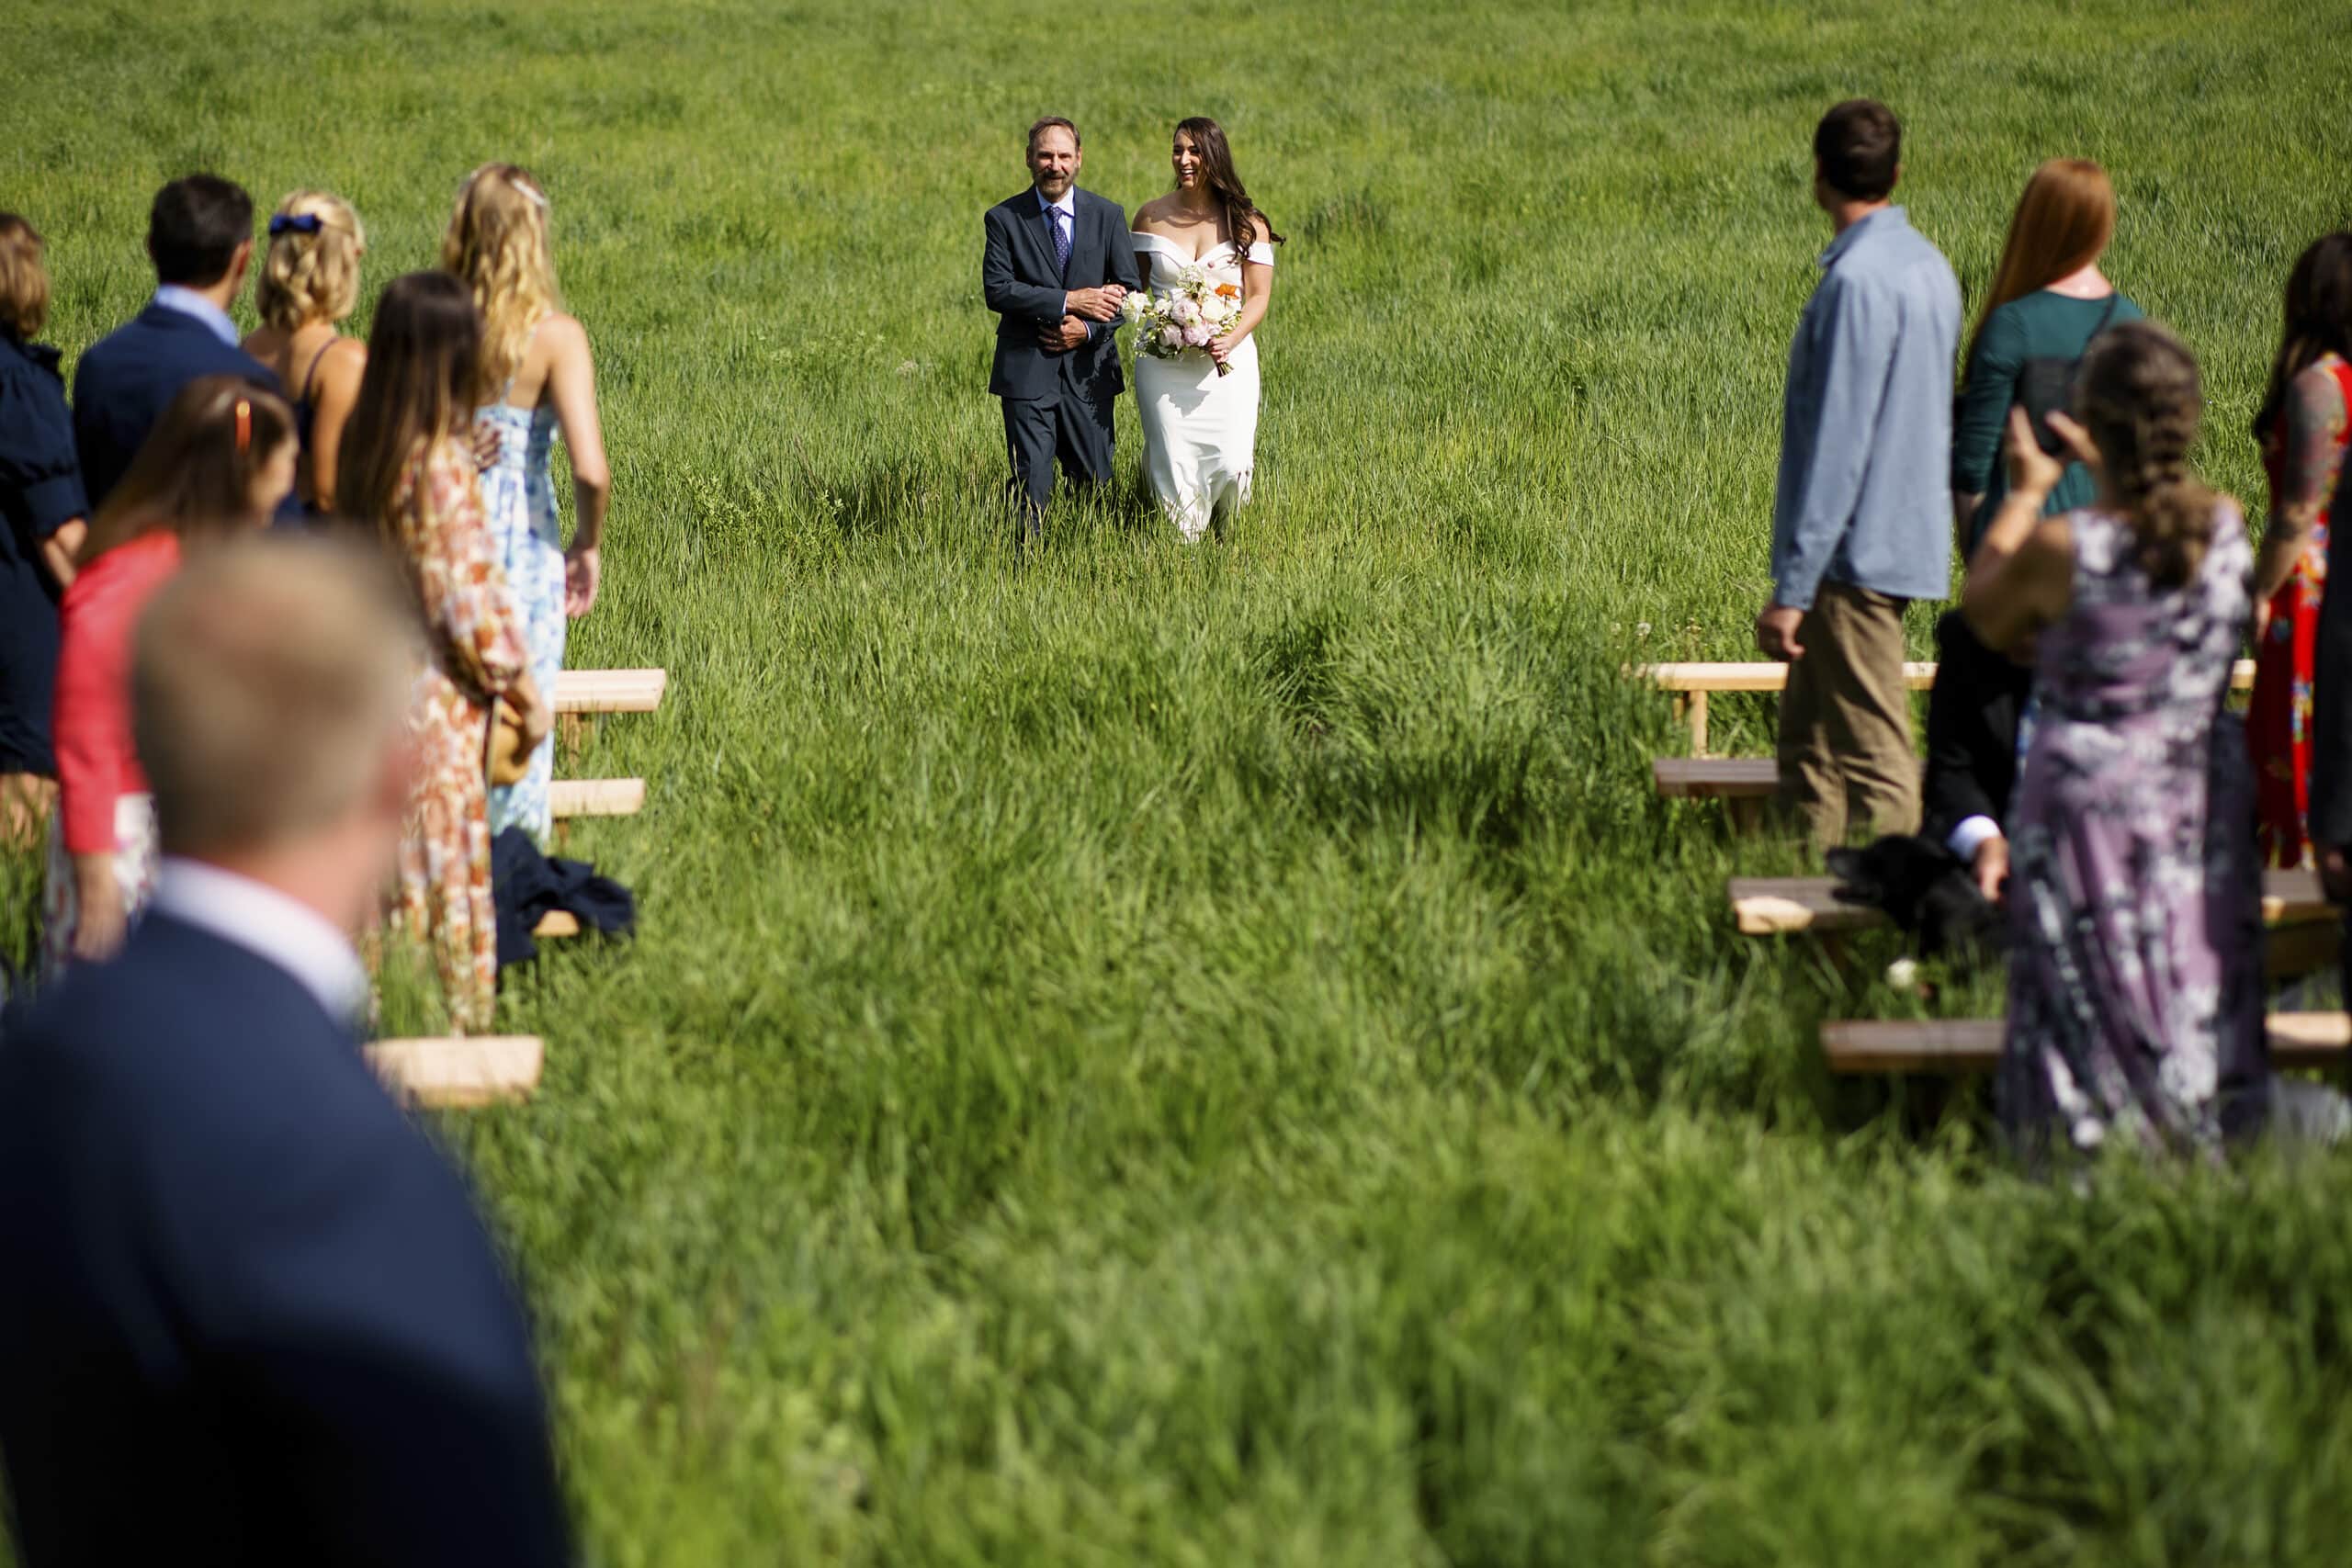 The bride and her father walk down an aisle of tall grass